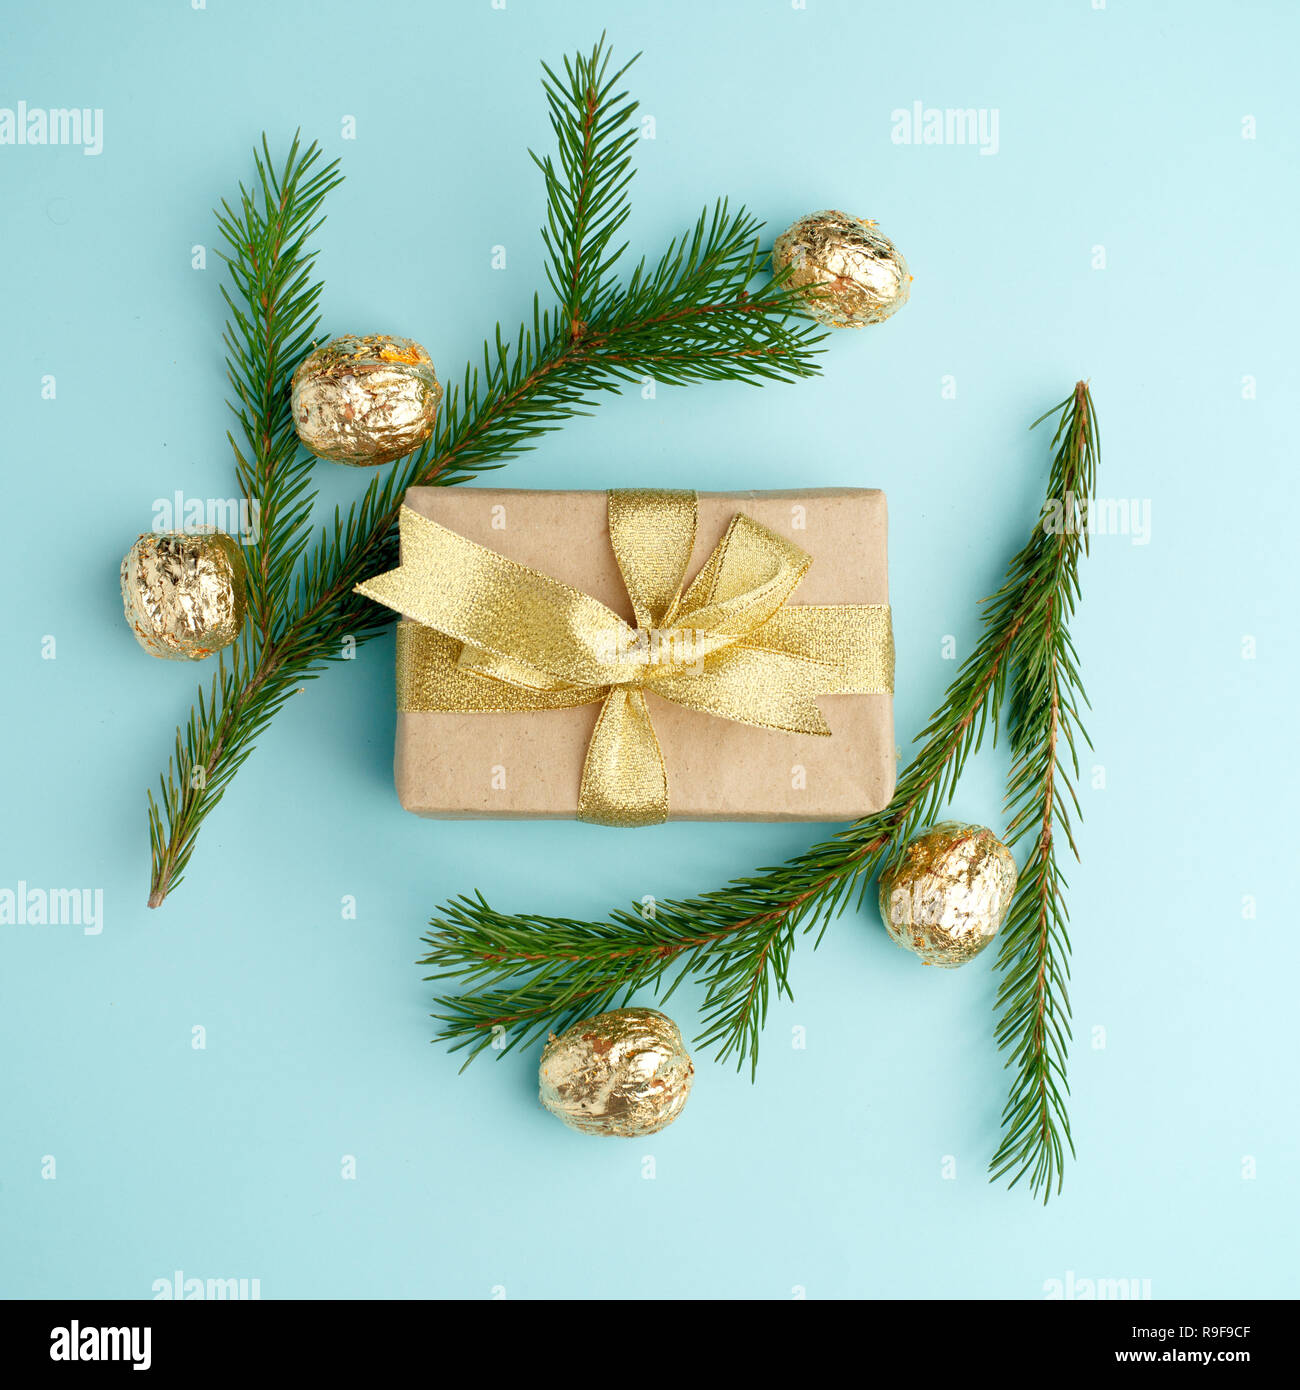 Creative Chistmas layout made of winter greenery, kraft gift box with golden ribbon and golden decoration on blue background. Flat lay, top view. Holi Stock Photo